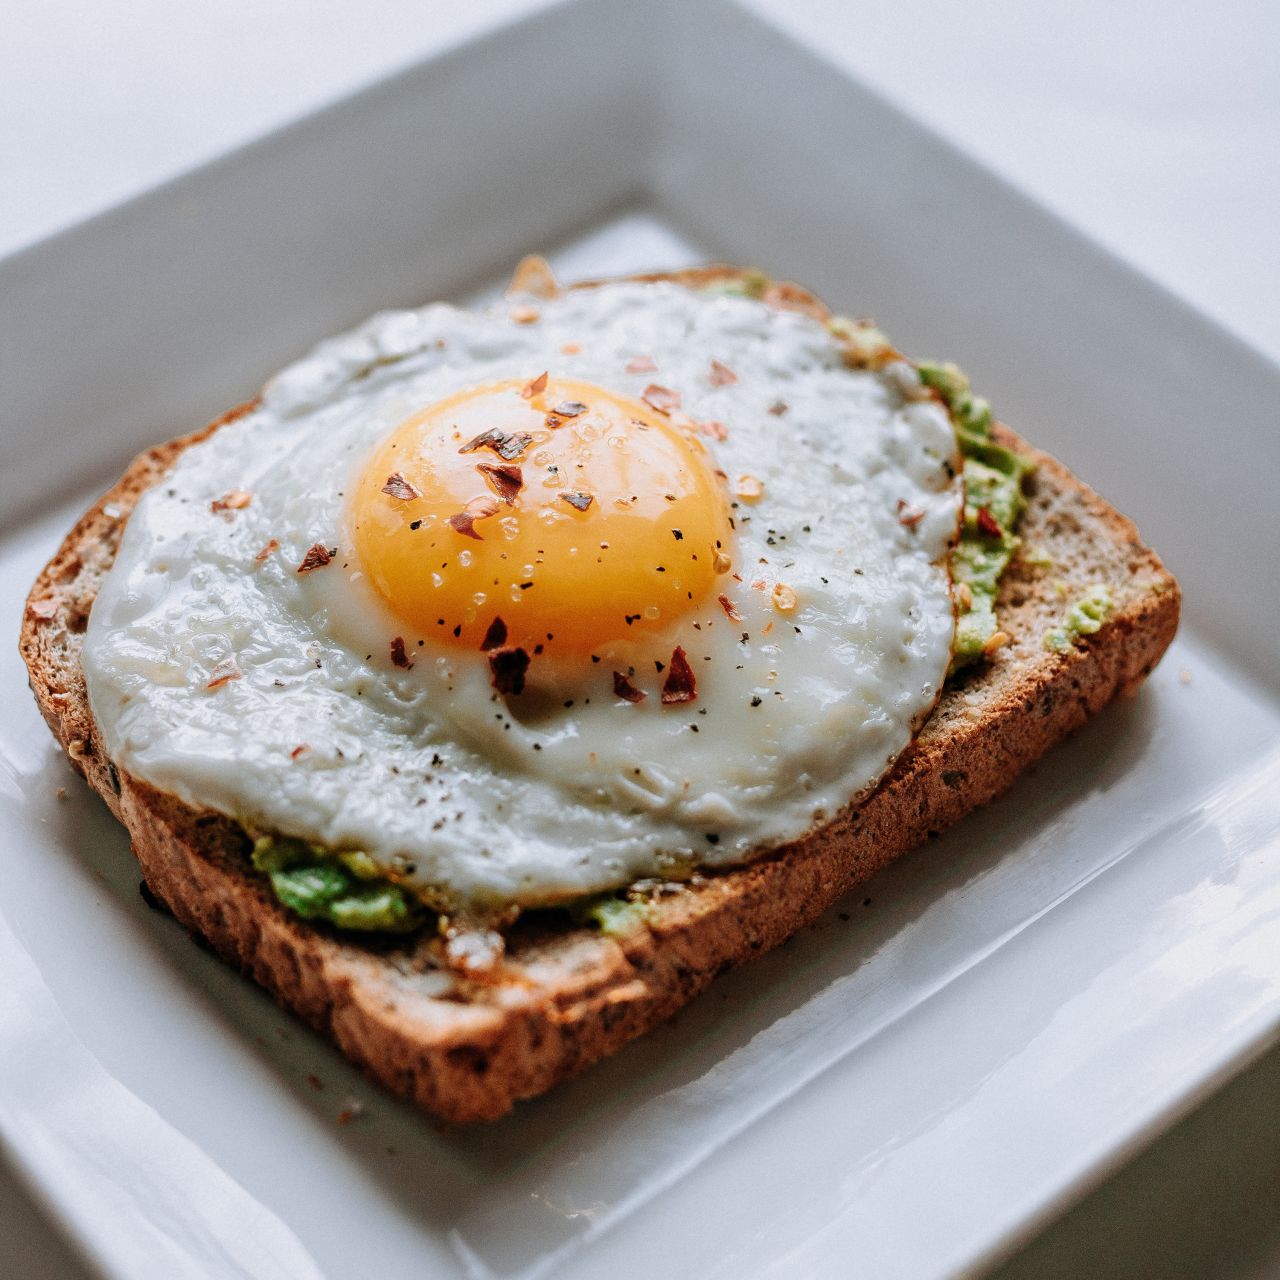 <strong>Australia:</strong> Breakfast in this part of the world varies, but a mainstay is avocado toast topped with an egg.